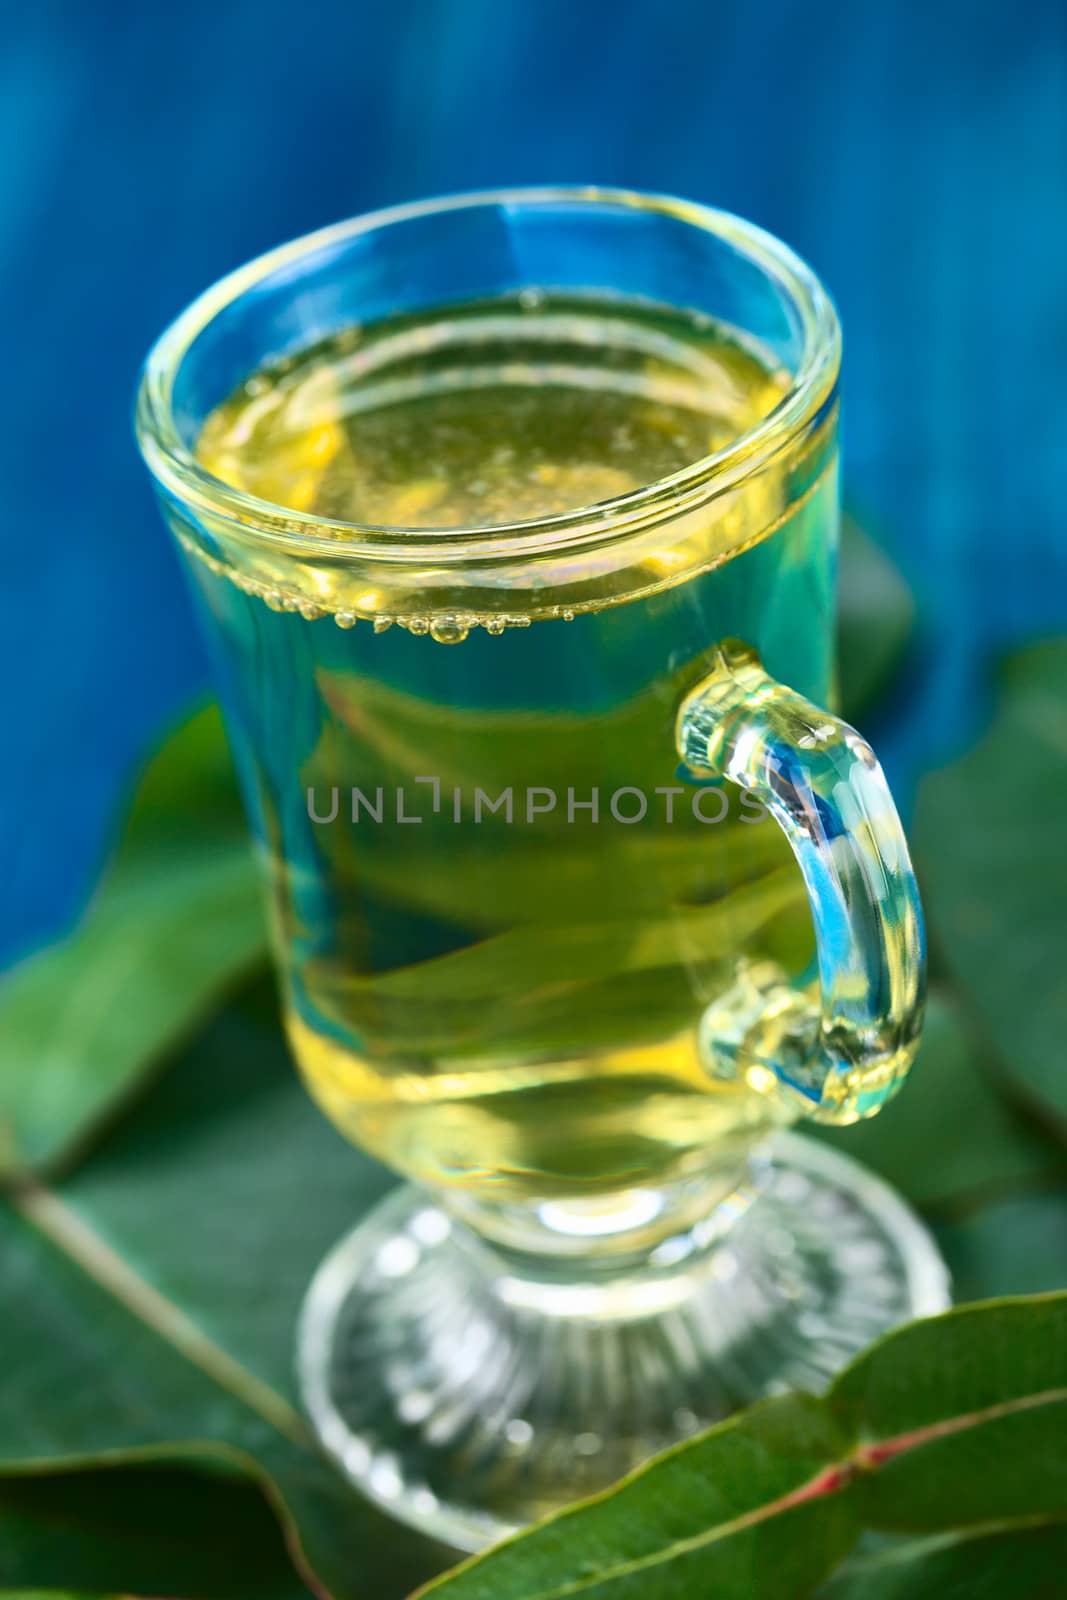 Freshly prepared hot tea made of Eucalyptus leaves in glass (Selective Focus, Focus on the front of the glass rim)